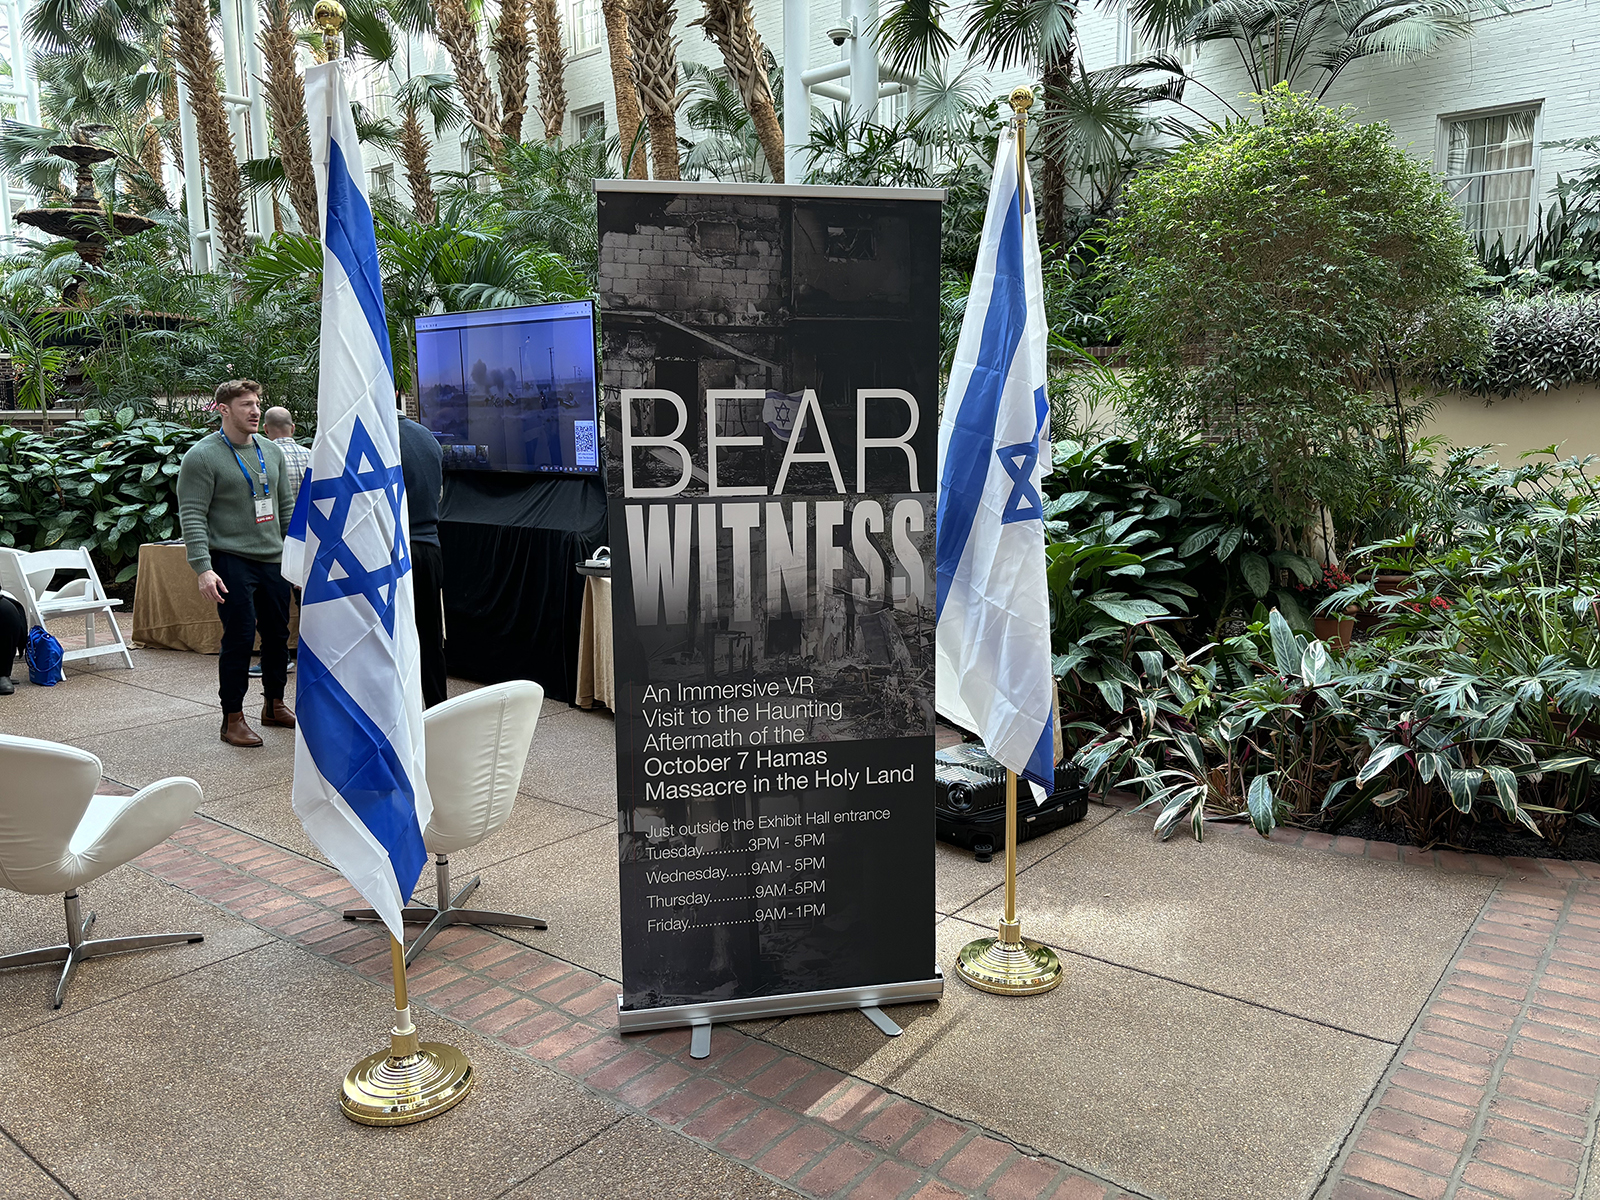 “Bear Witness" experience during the National Religious Broadcasters convention at the Gaylord Opryland Resort and Convention Center in Nashville, Tenn. (RNS photo/Bob Smietana)